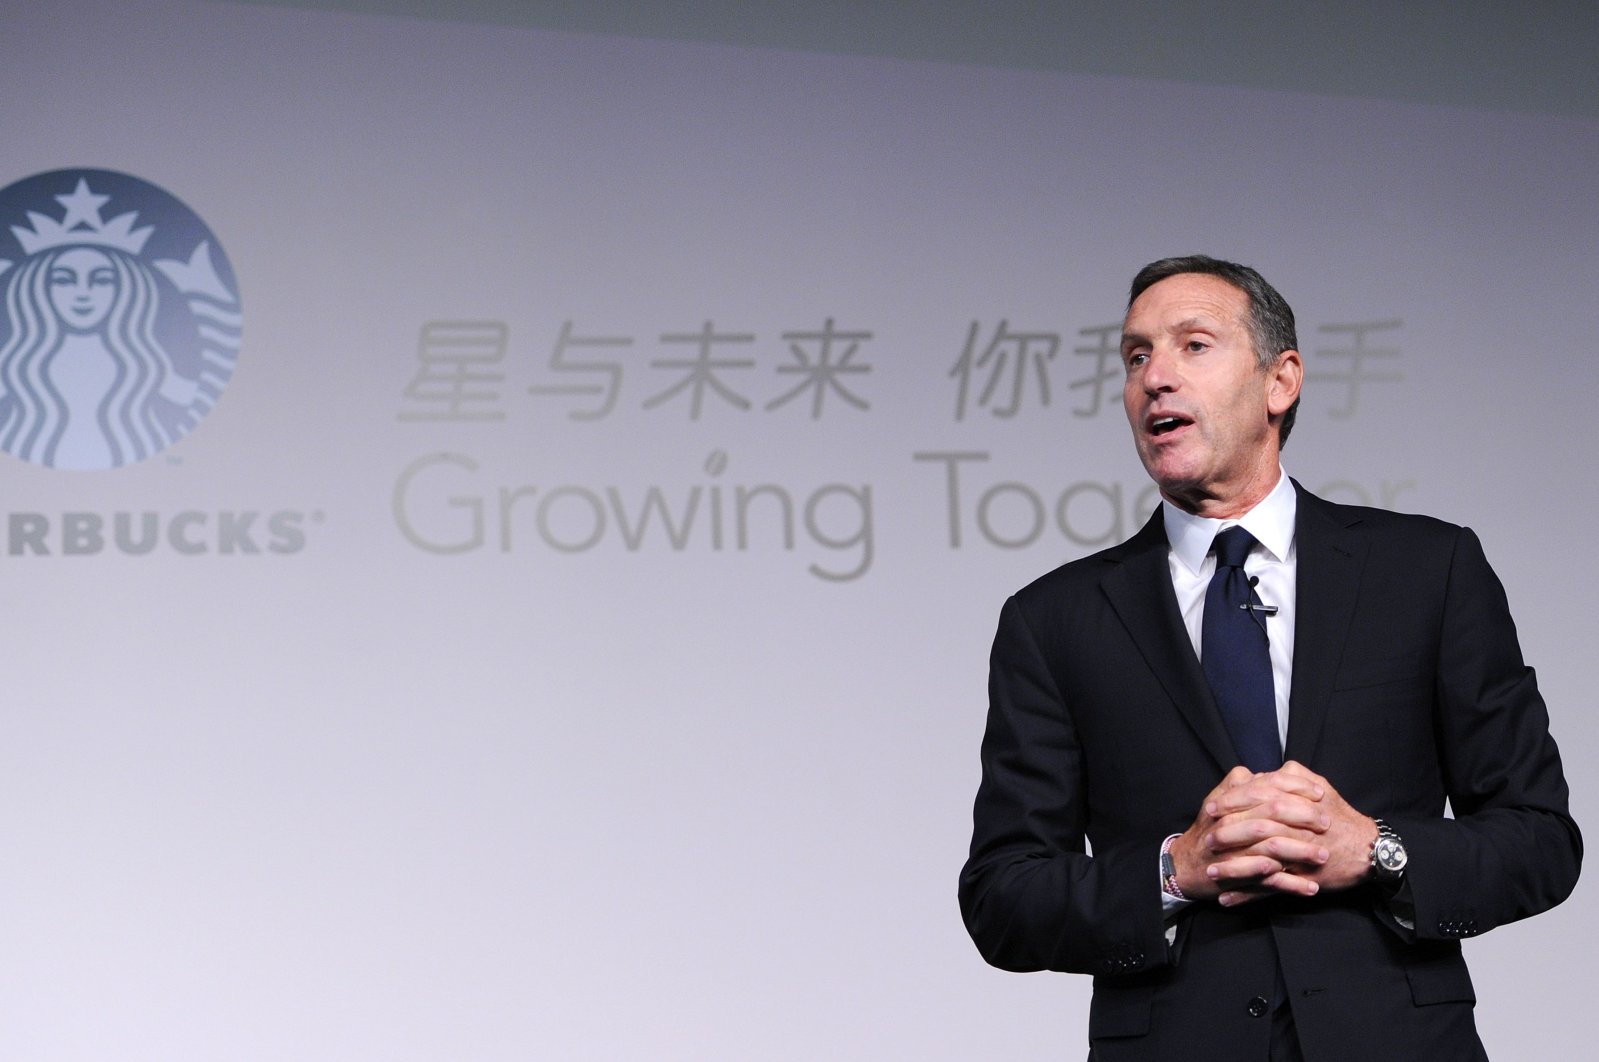 Howard Schultz, president and chief executive officer of Starbucks, delivers a speech at the Starbucks Partner Family Forum in Beijing, China, April 18, 2012. (AFP Photo)